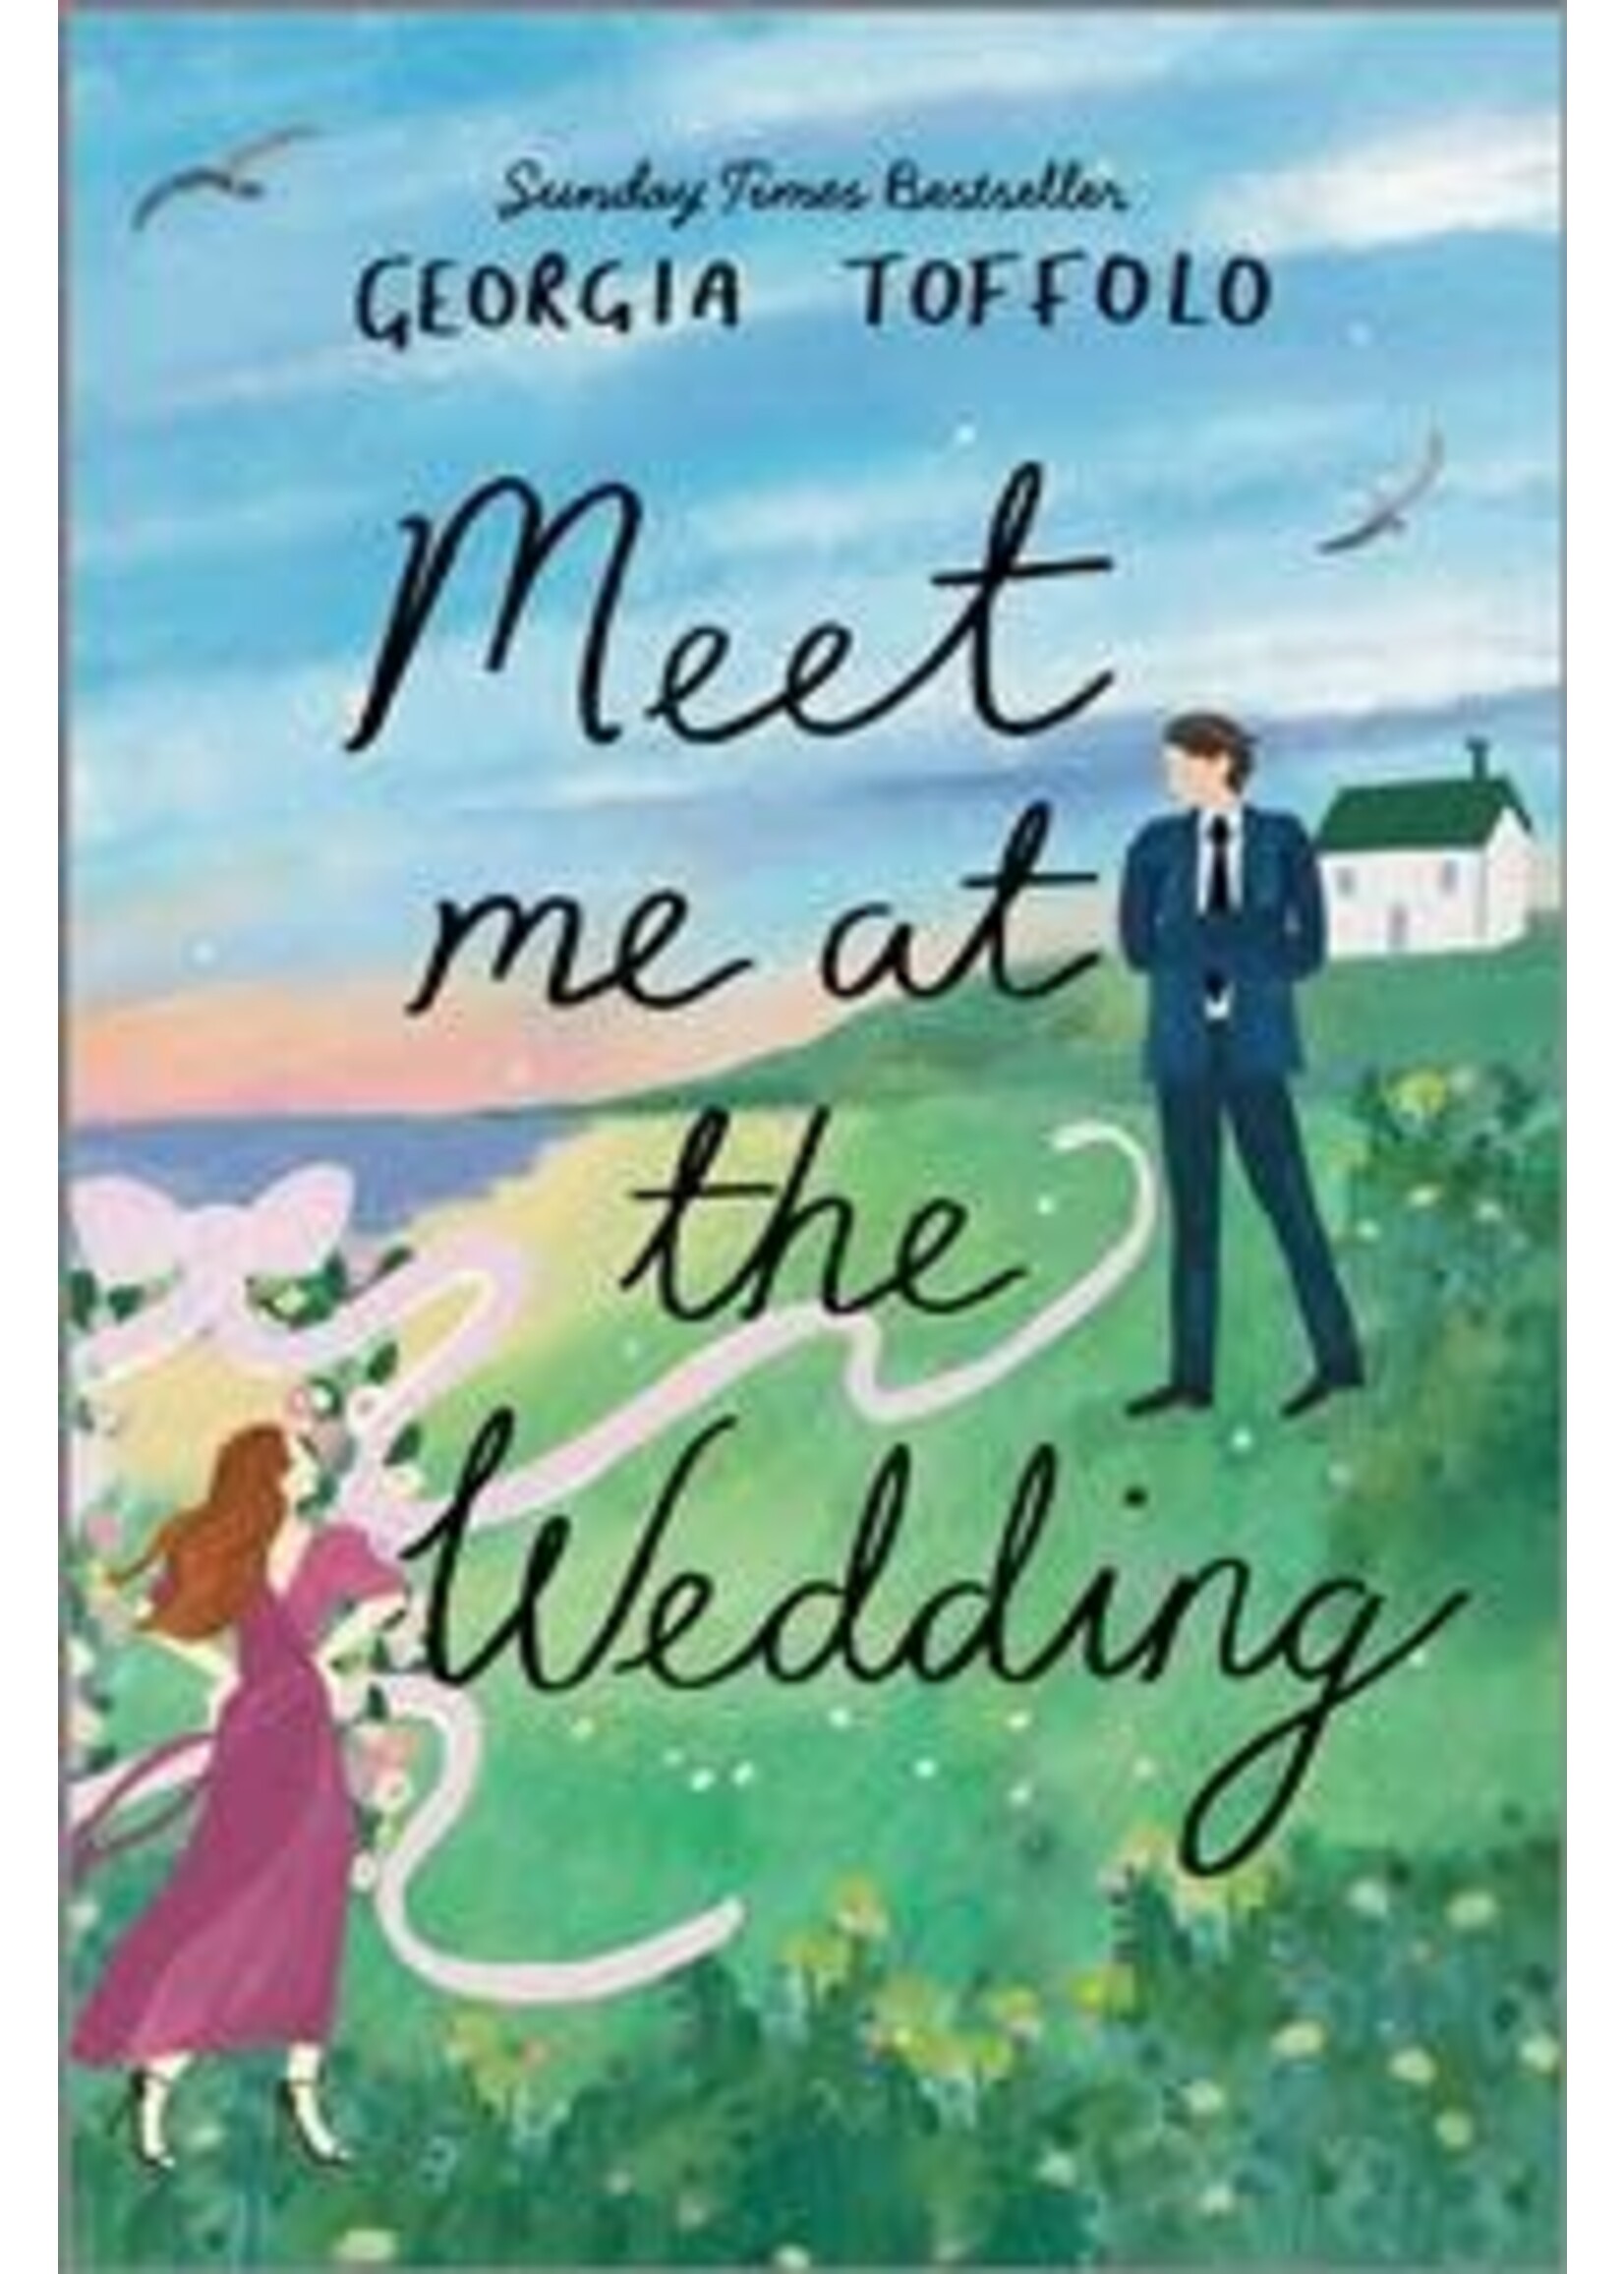 Meet Me at the Wedding by Georgia Toffolo